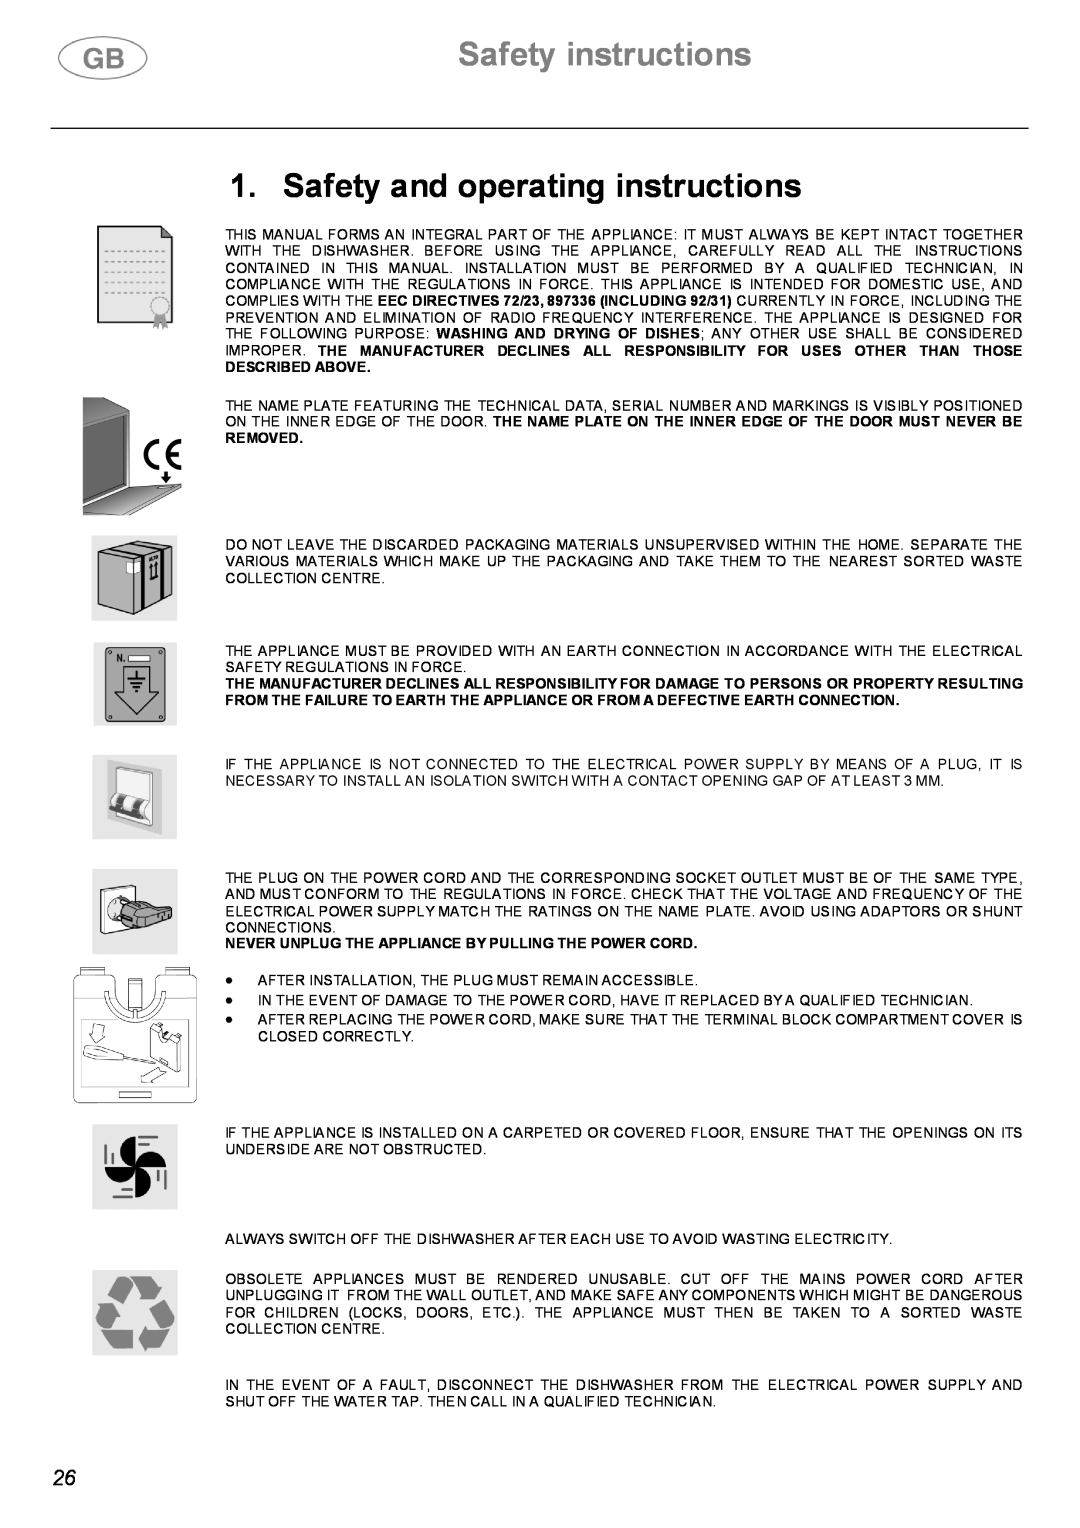 Smeg LVF32G instruction manual Safety instructions, Safety and operating instructions, Described Above, Removed 